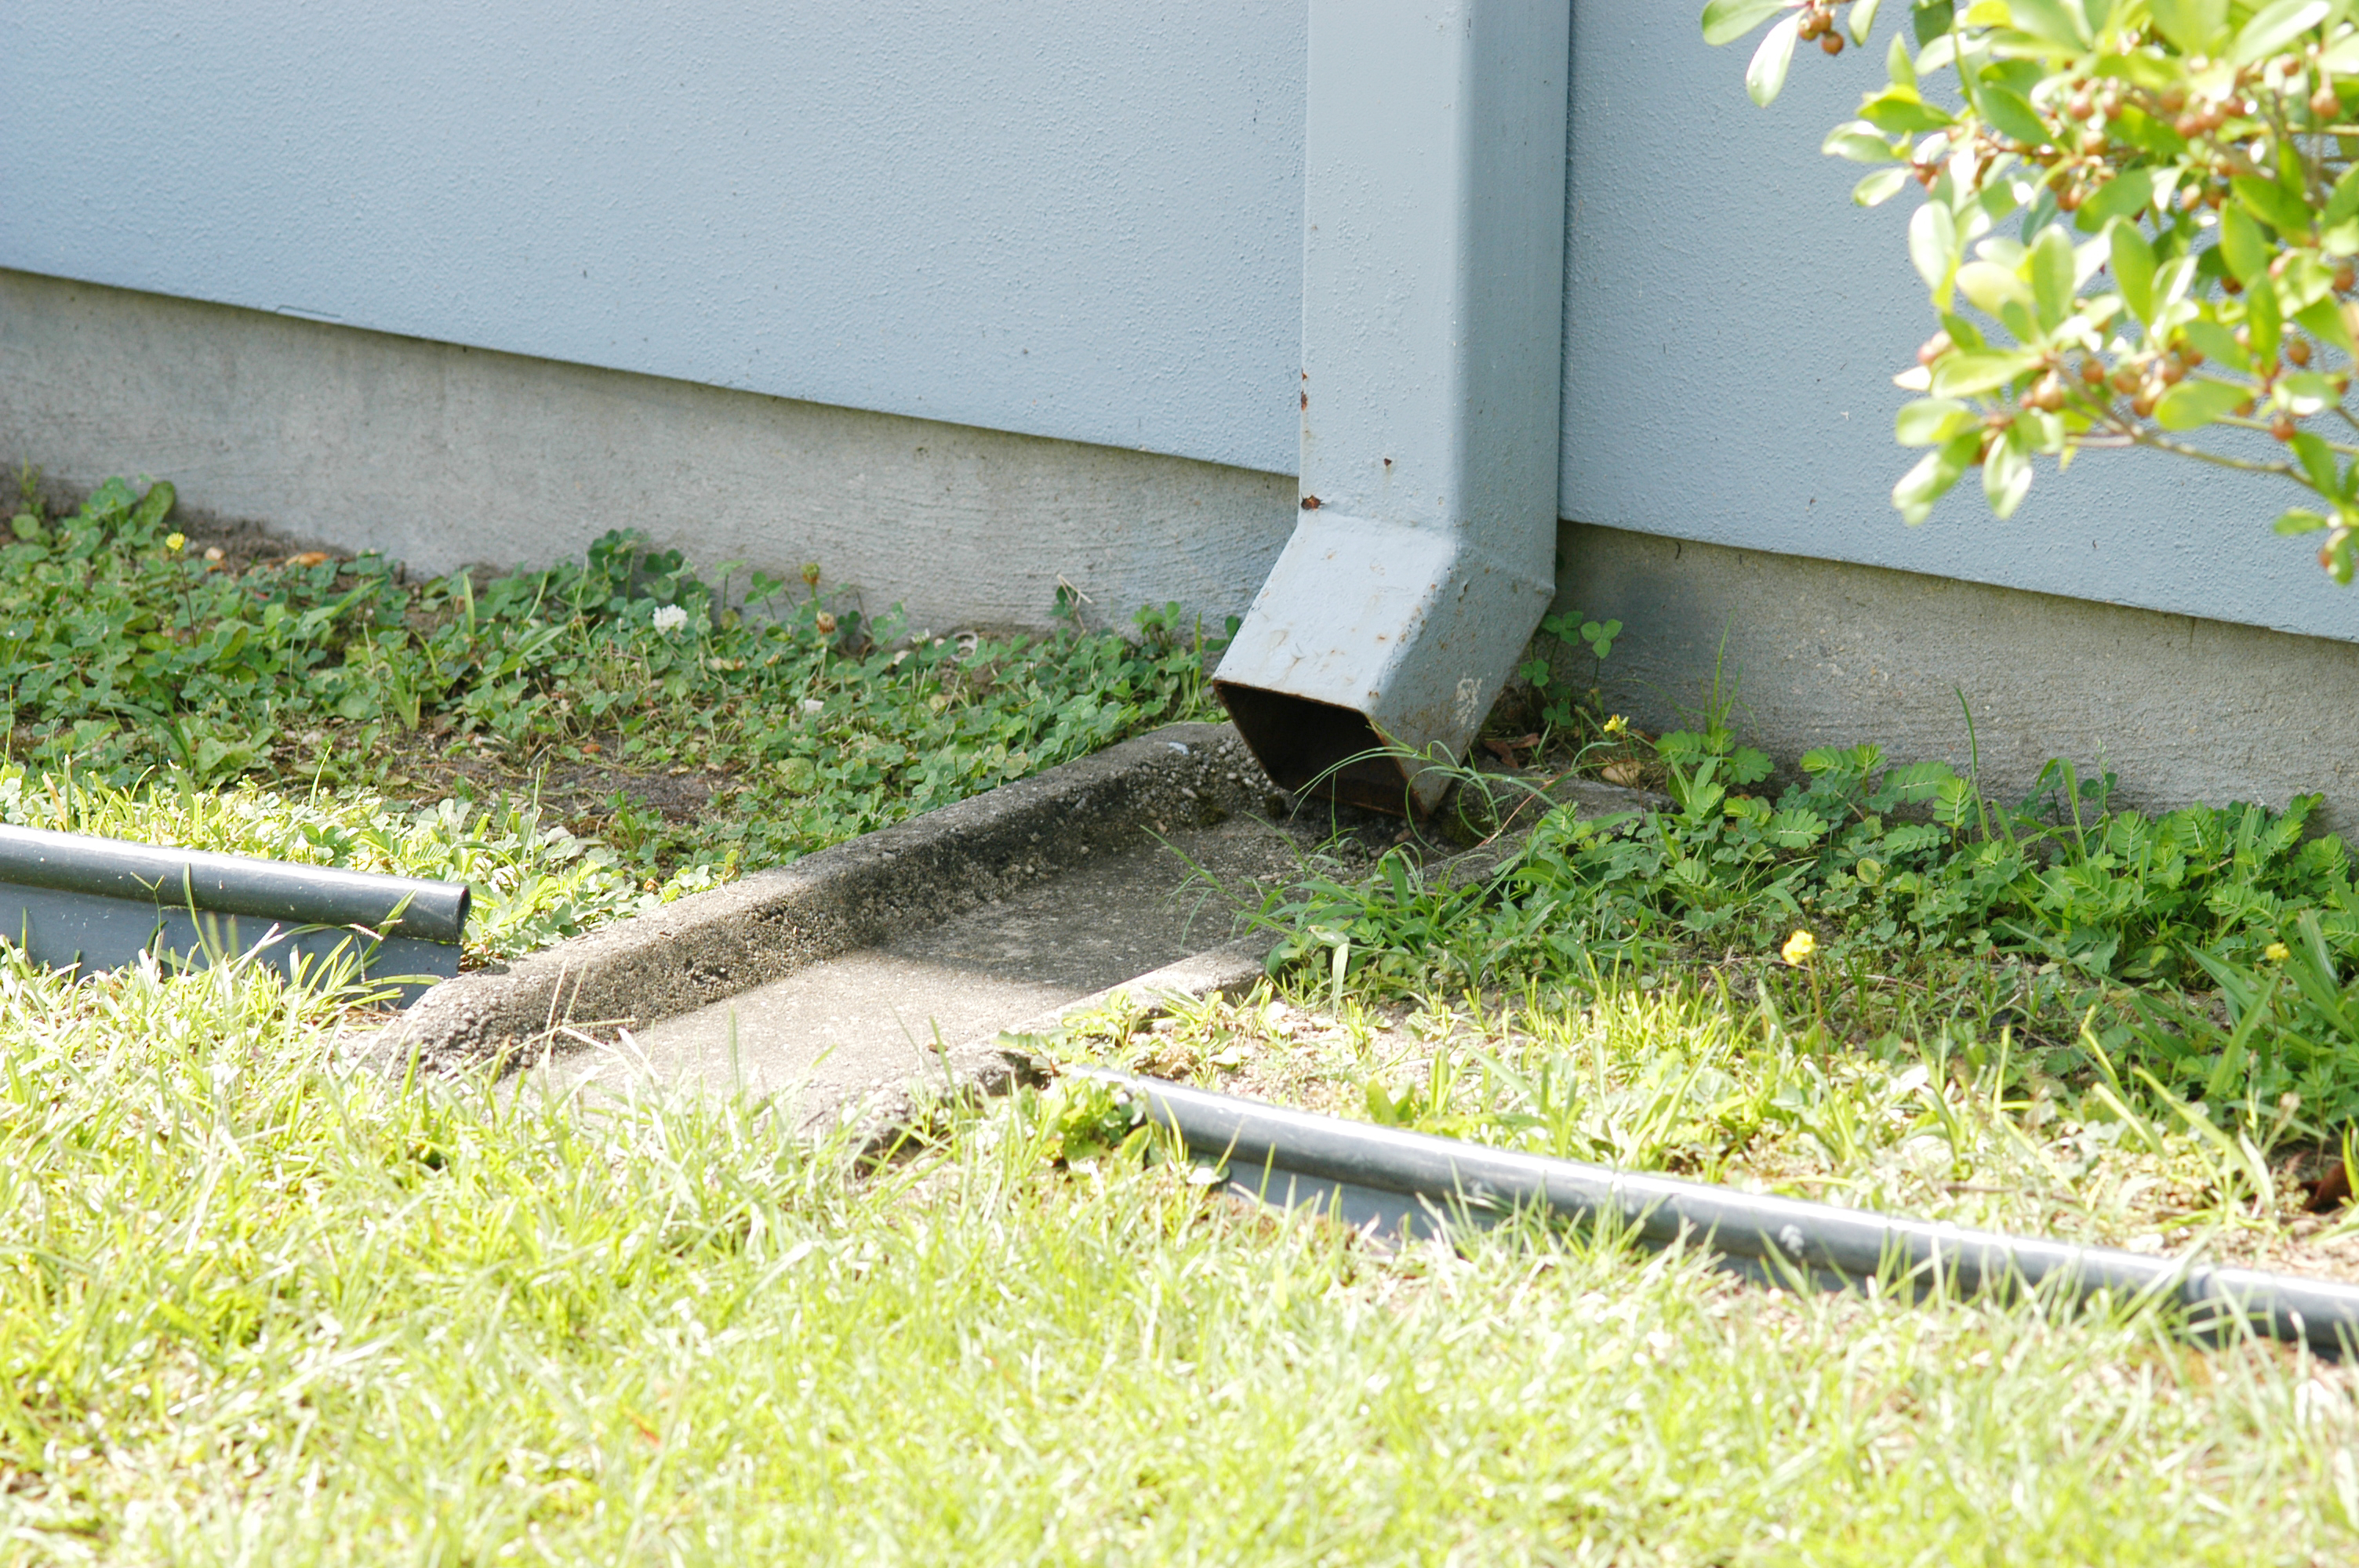 Splash blocks direct water from gutter downspouts away from building foundations and reduce potential for termite infestation by preventing soil movement and slowing the breakdown of termiticide barriers. 